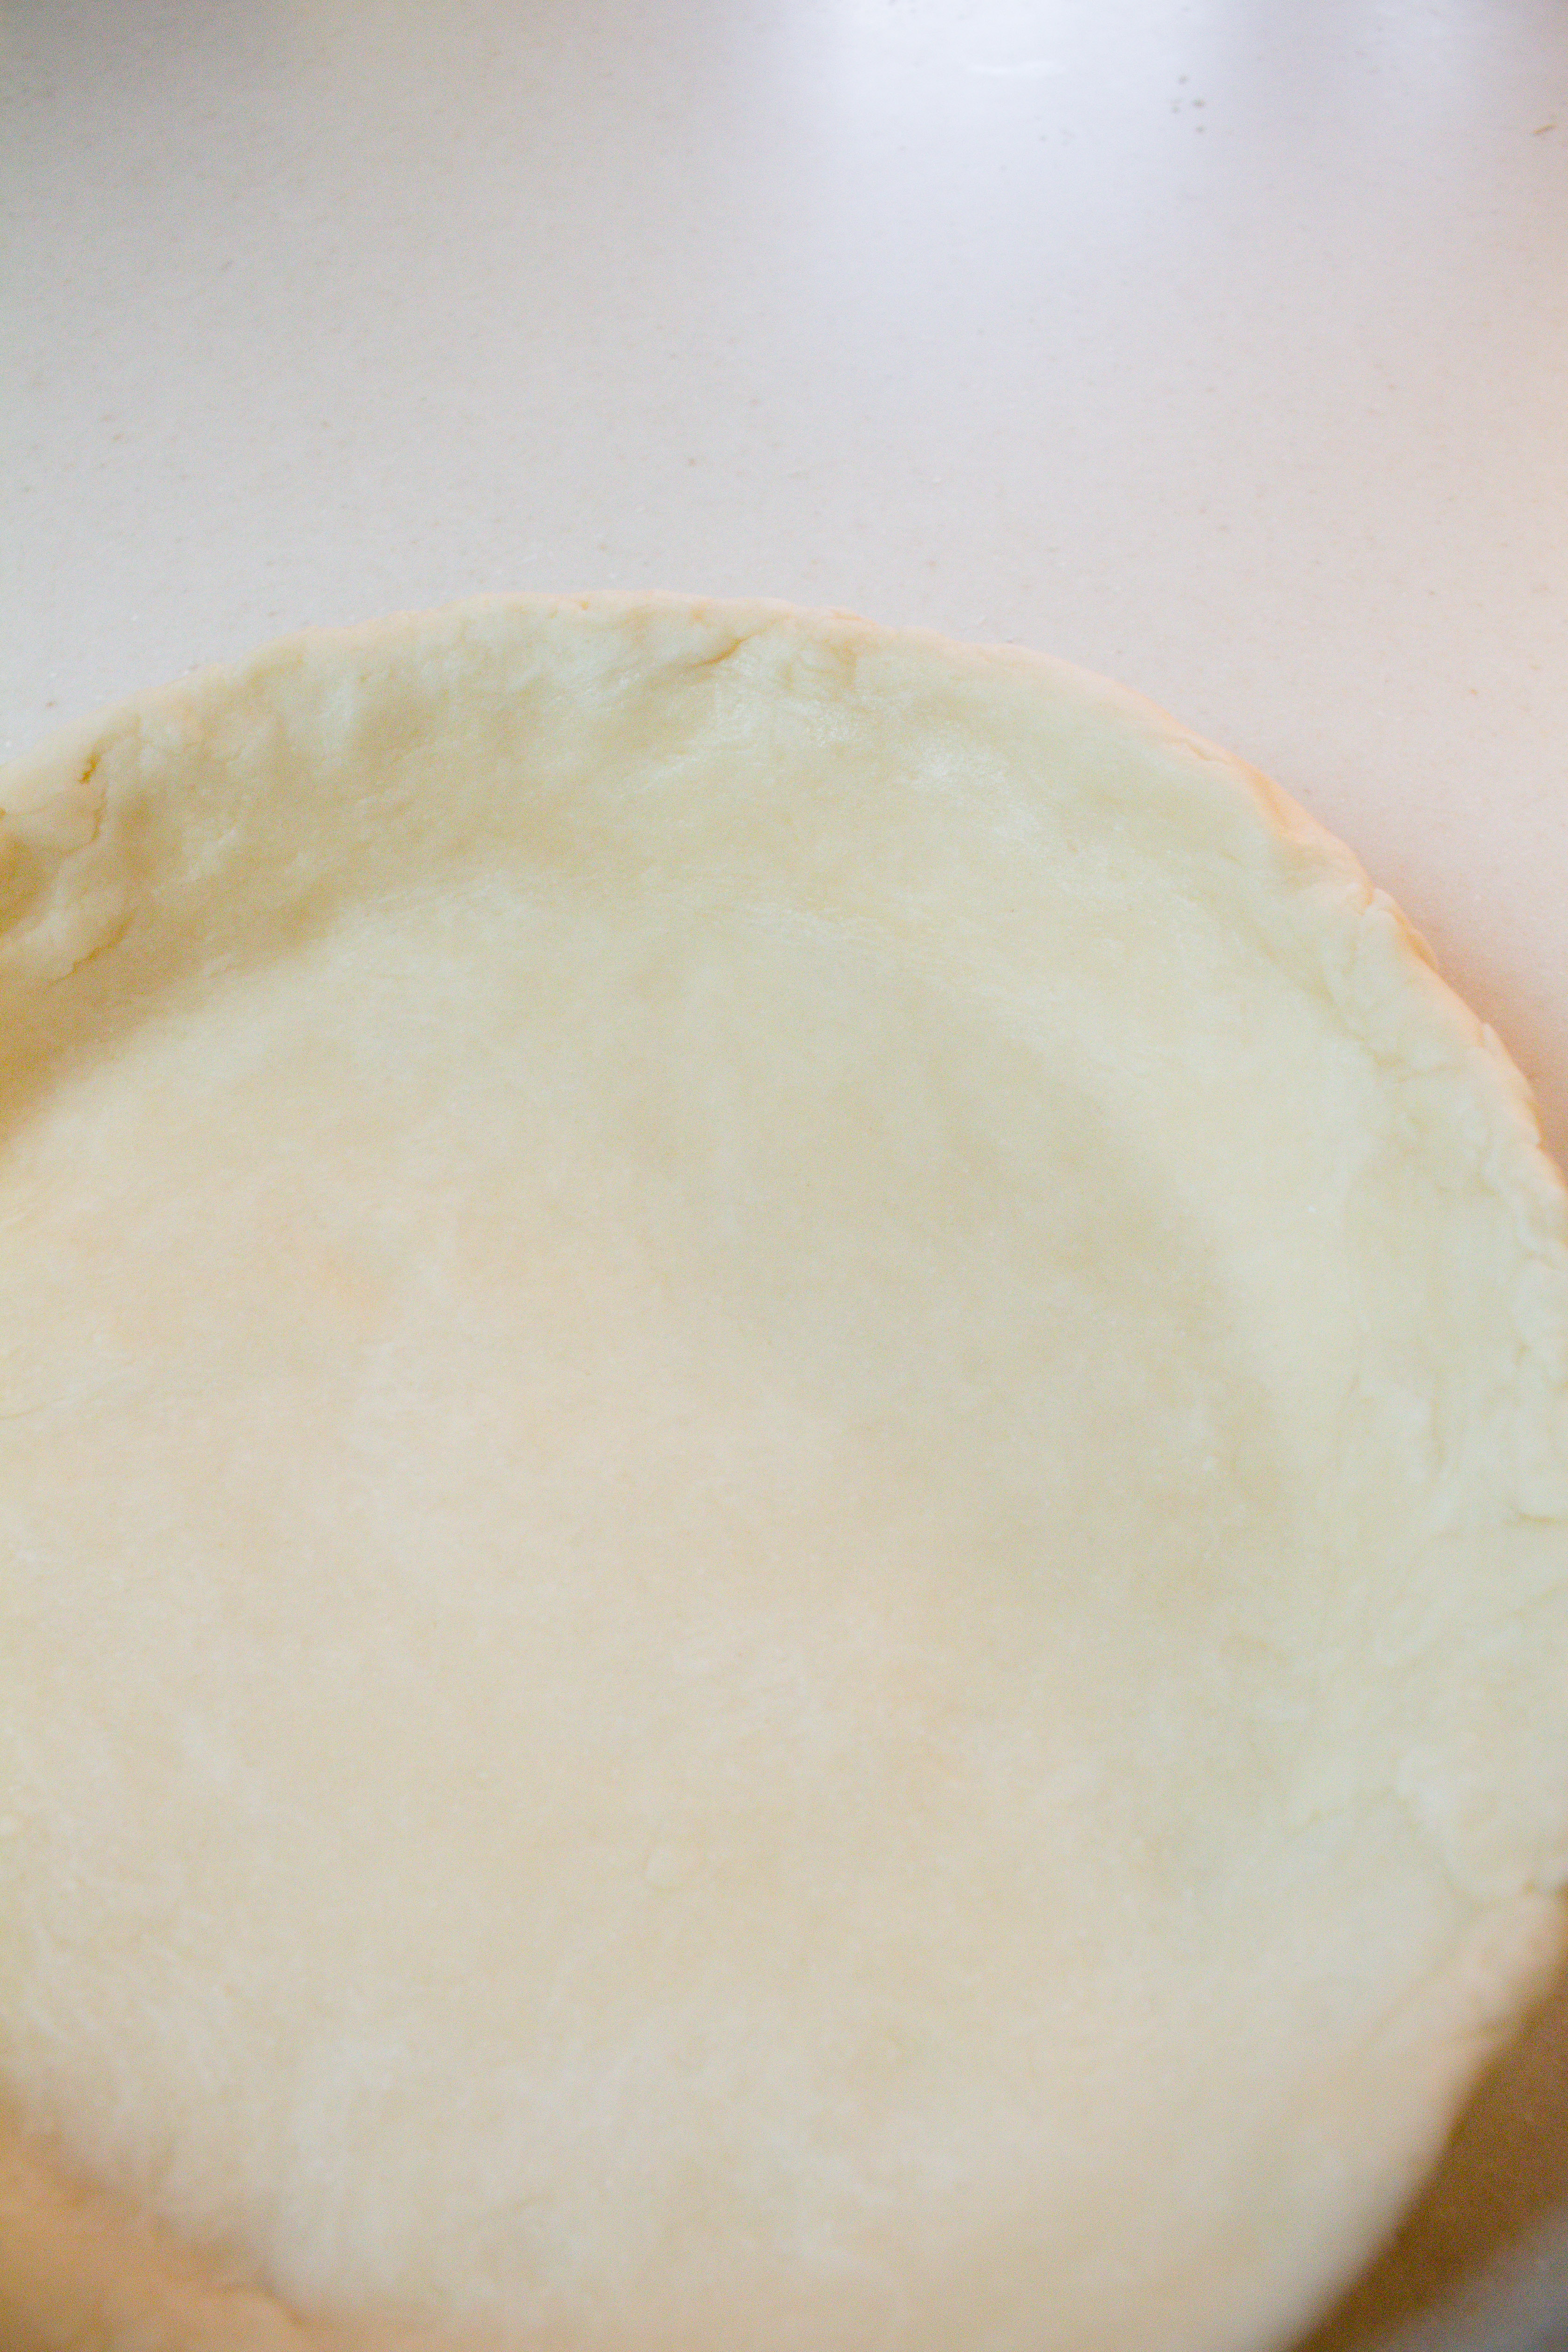 Using a homemade pie crust is one of those small things that makes every pie so much better! | Teaspoon of Nose